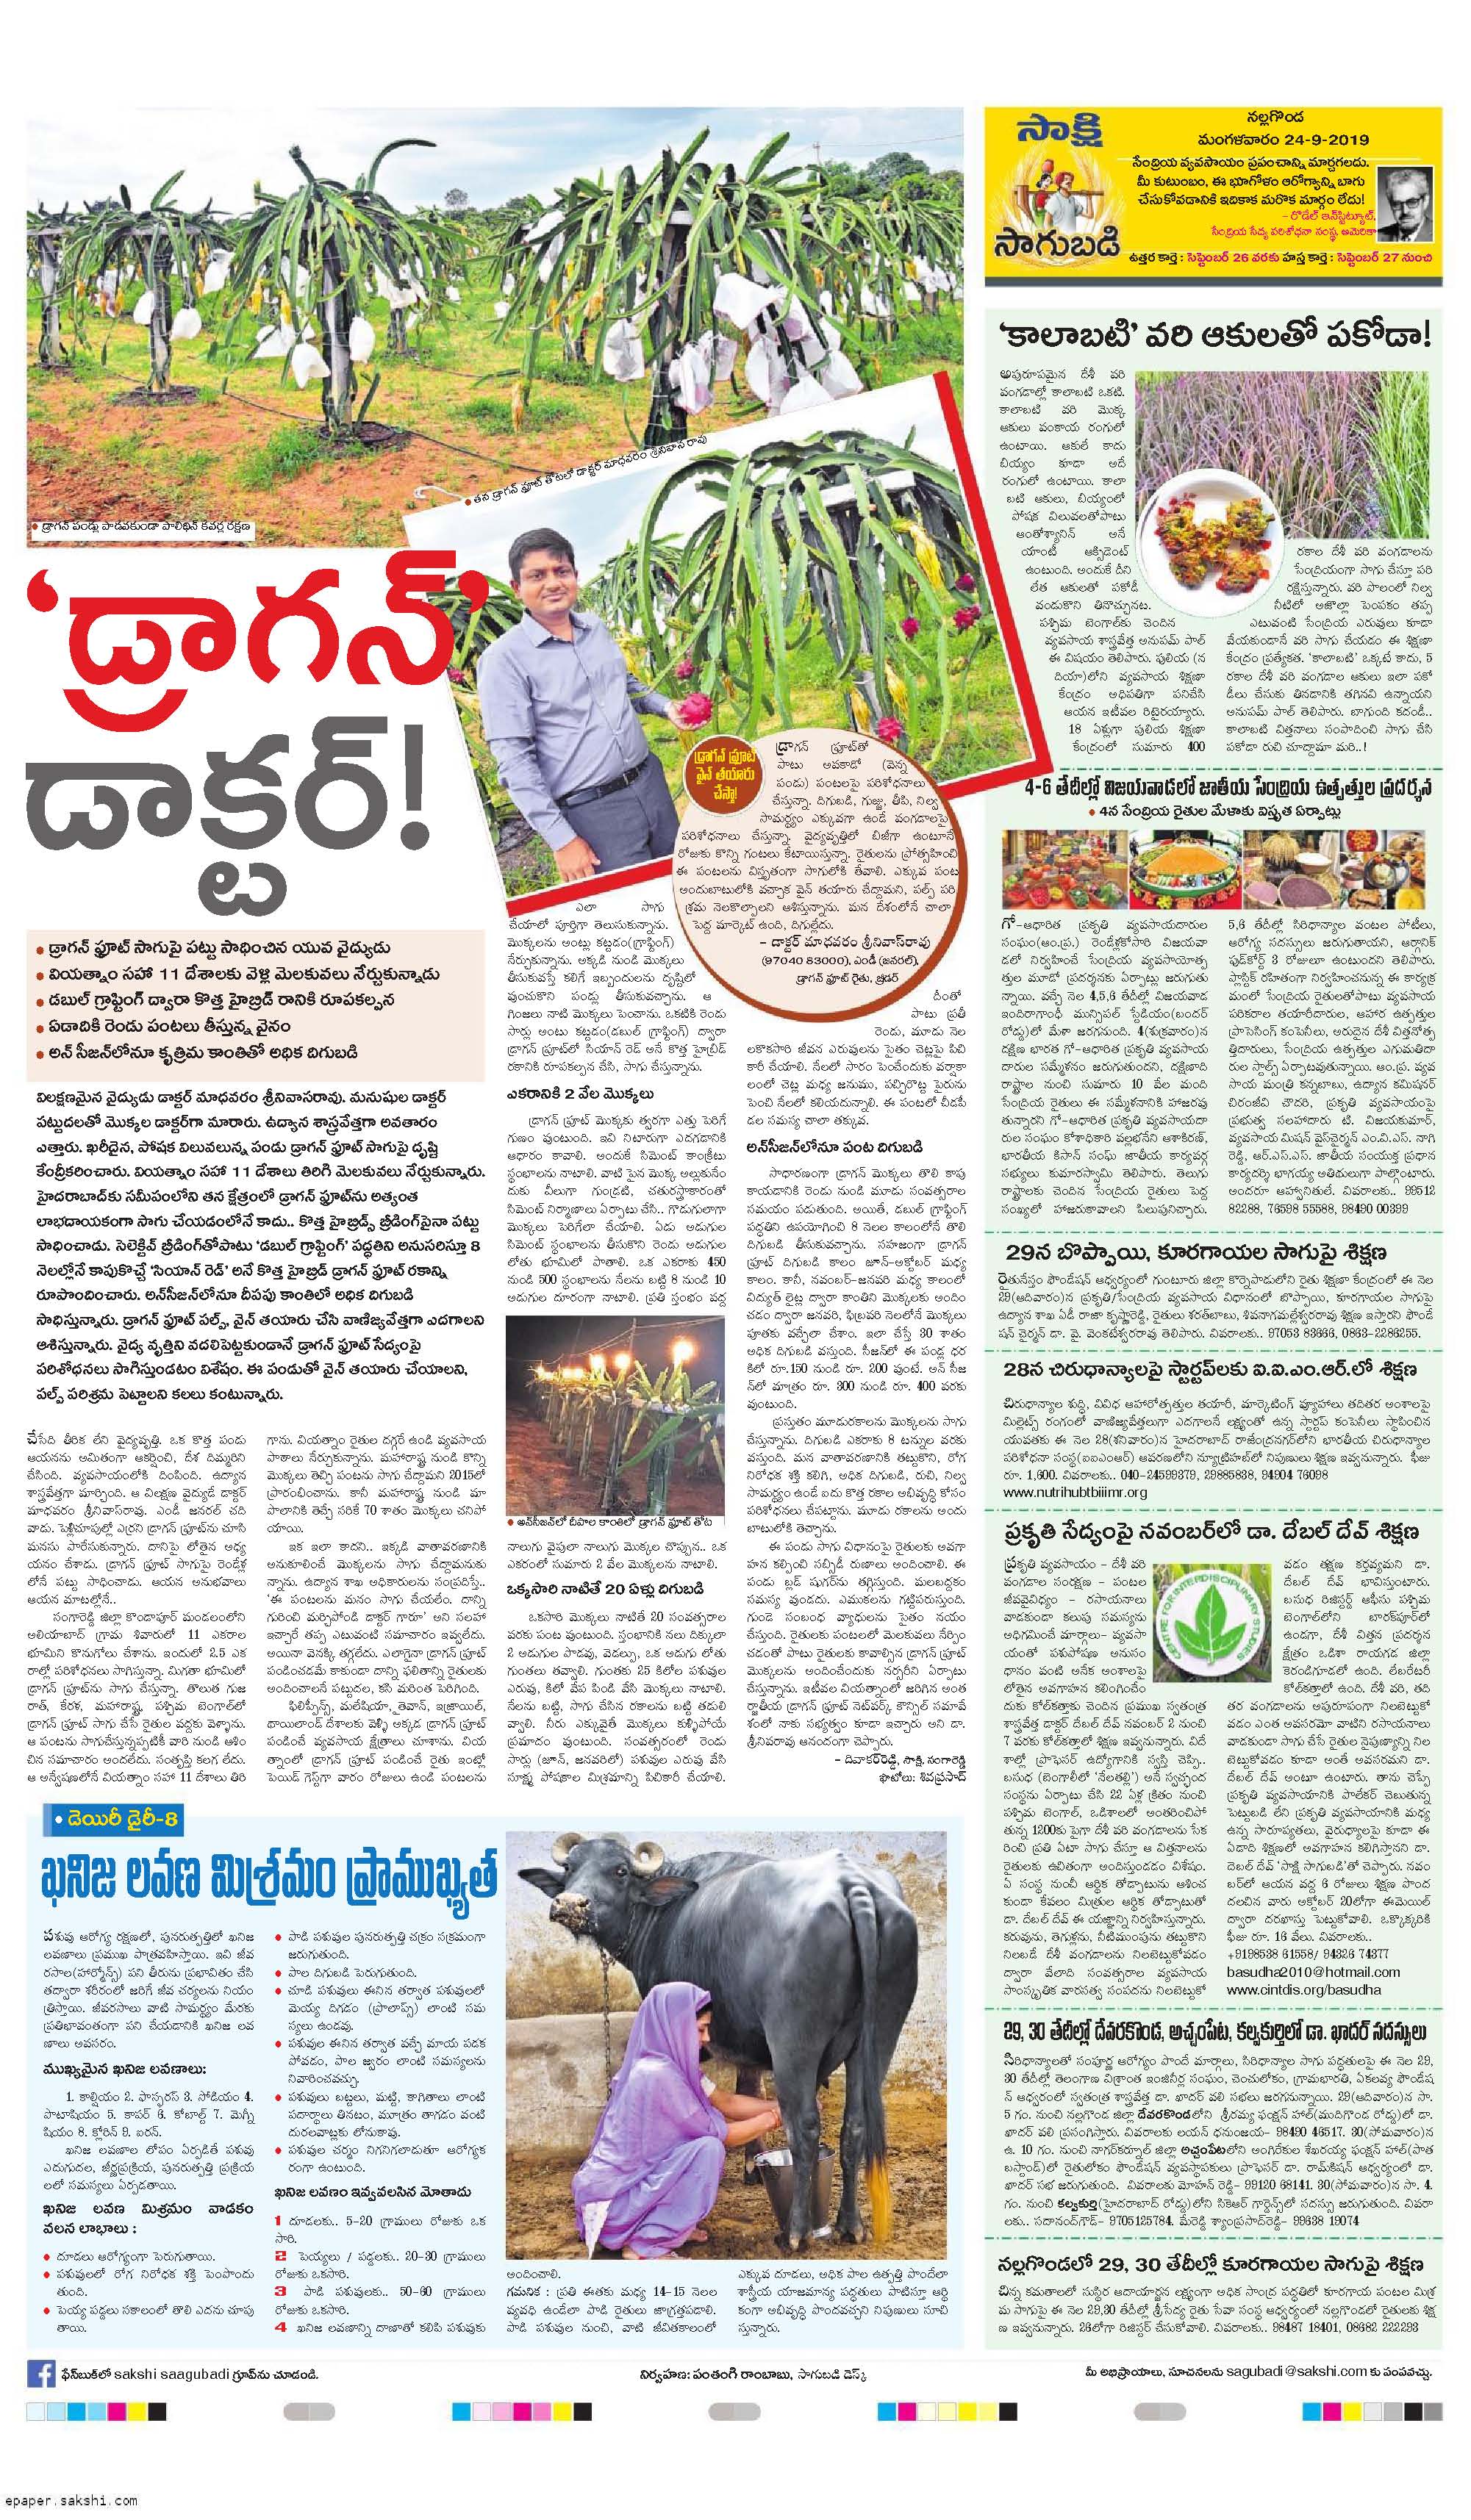 'Dragon Doctor' Our largest dragon-fruit farm story printed one of most popular Sakshi newspaper